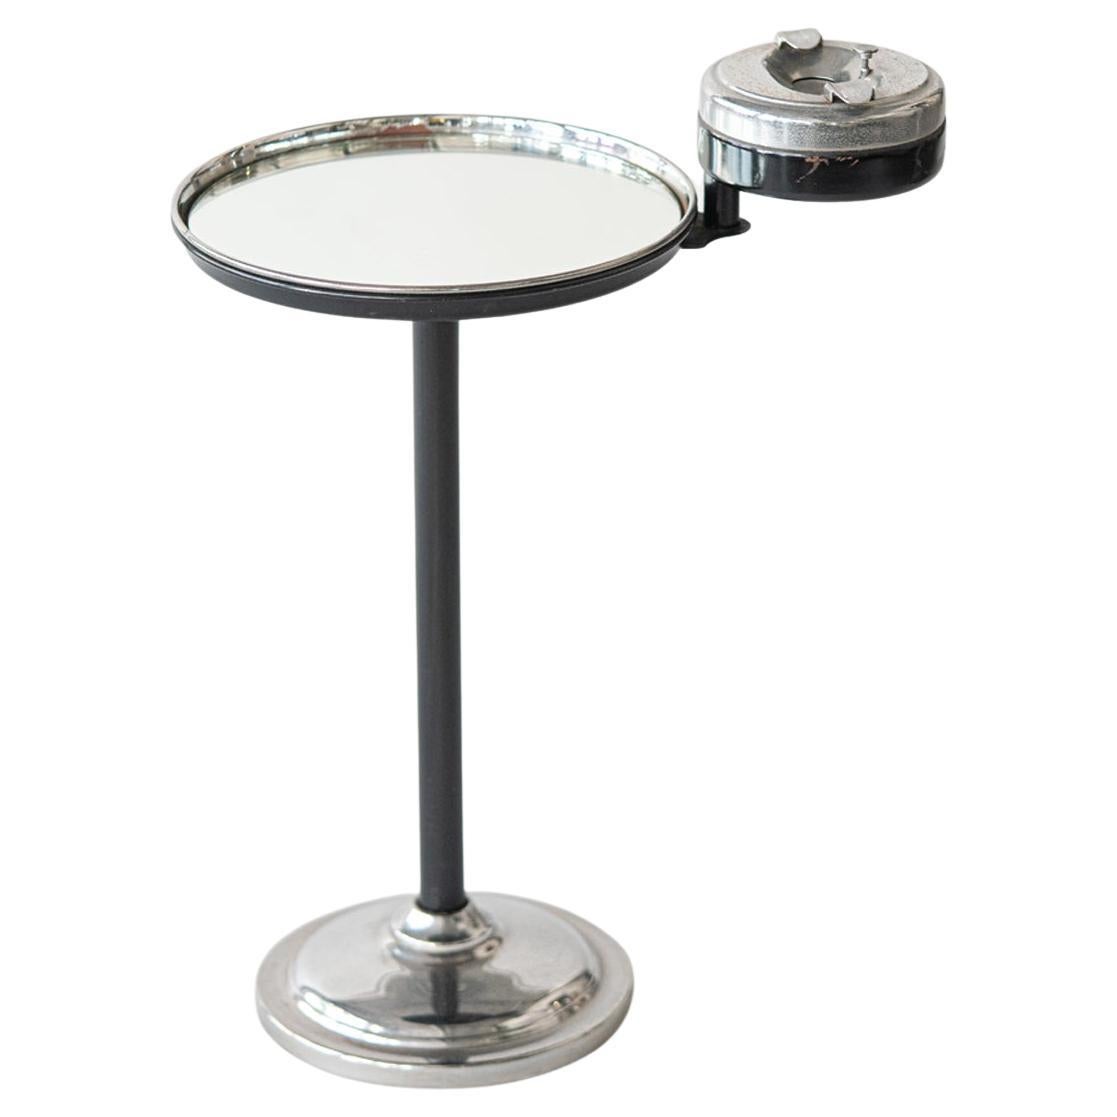 Art Deco Table with a Mirror Top and a Side Ash-Tray For Sale